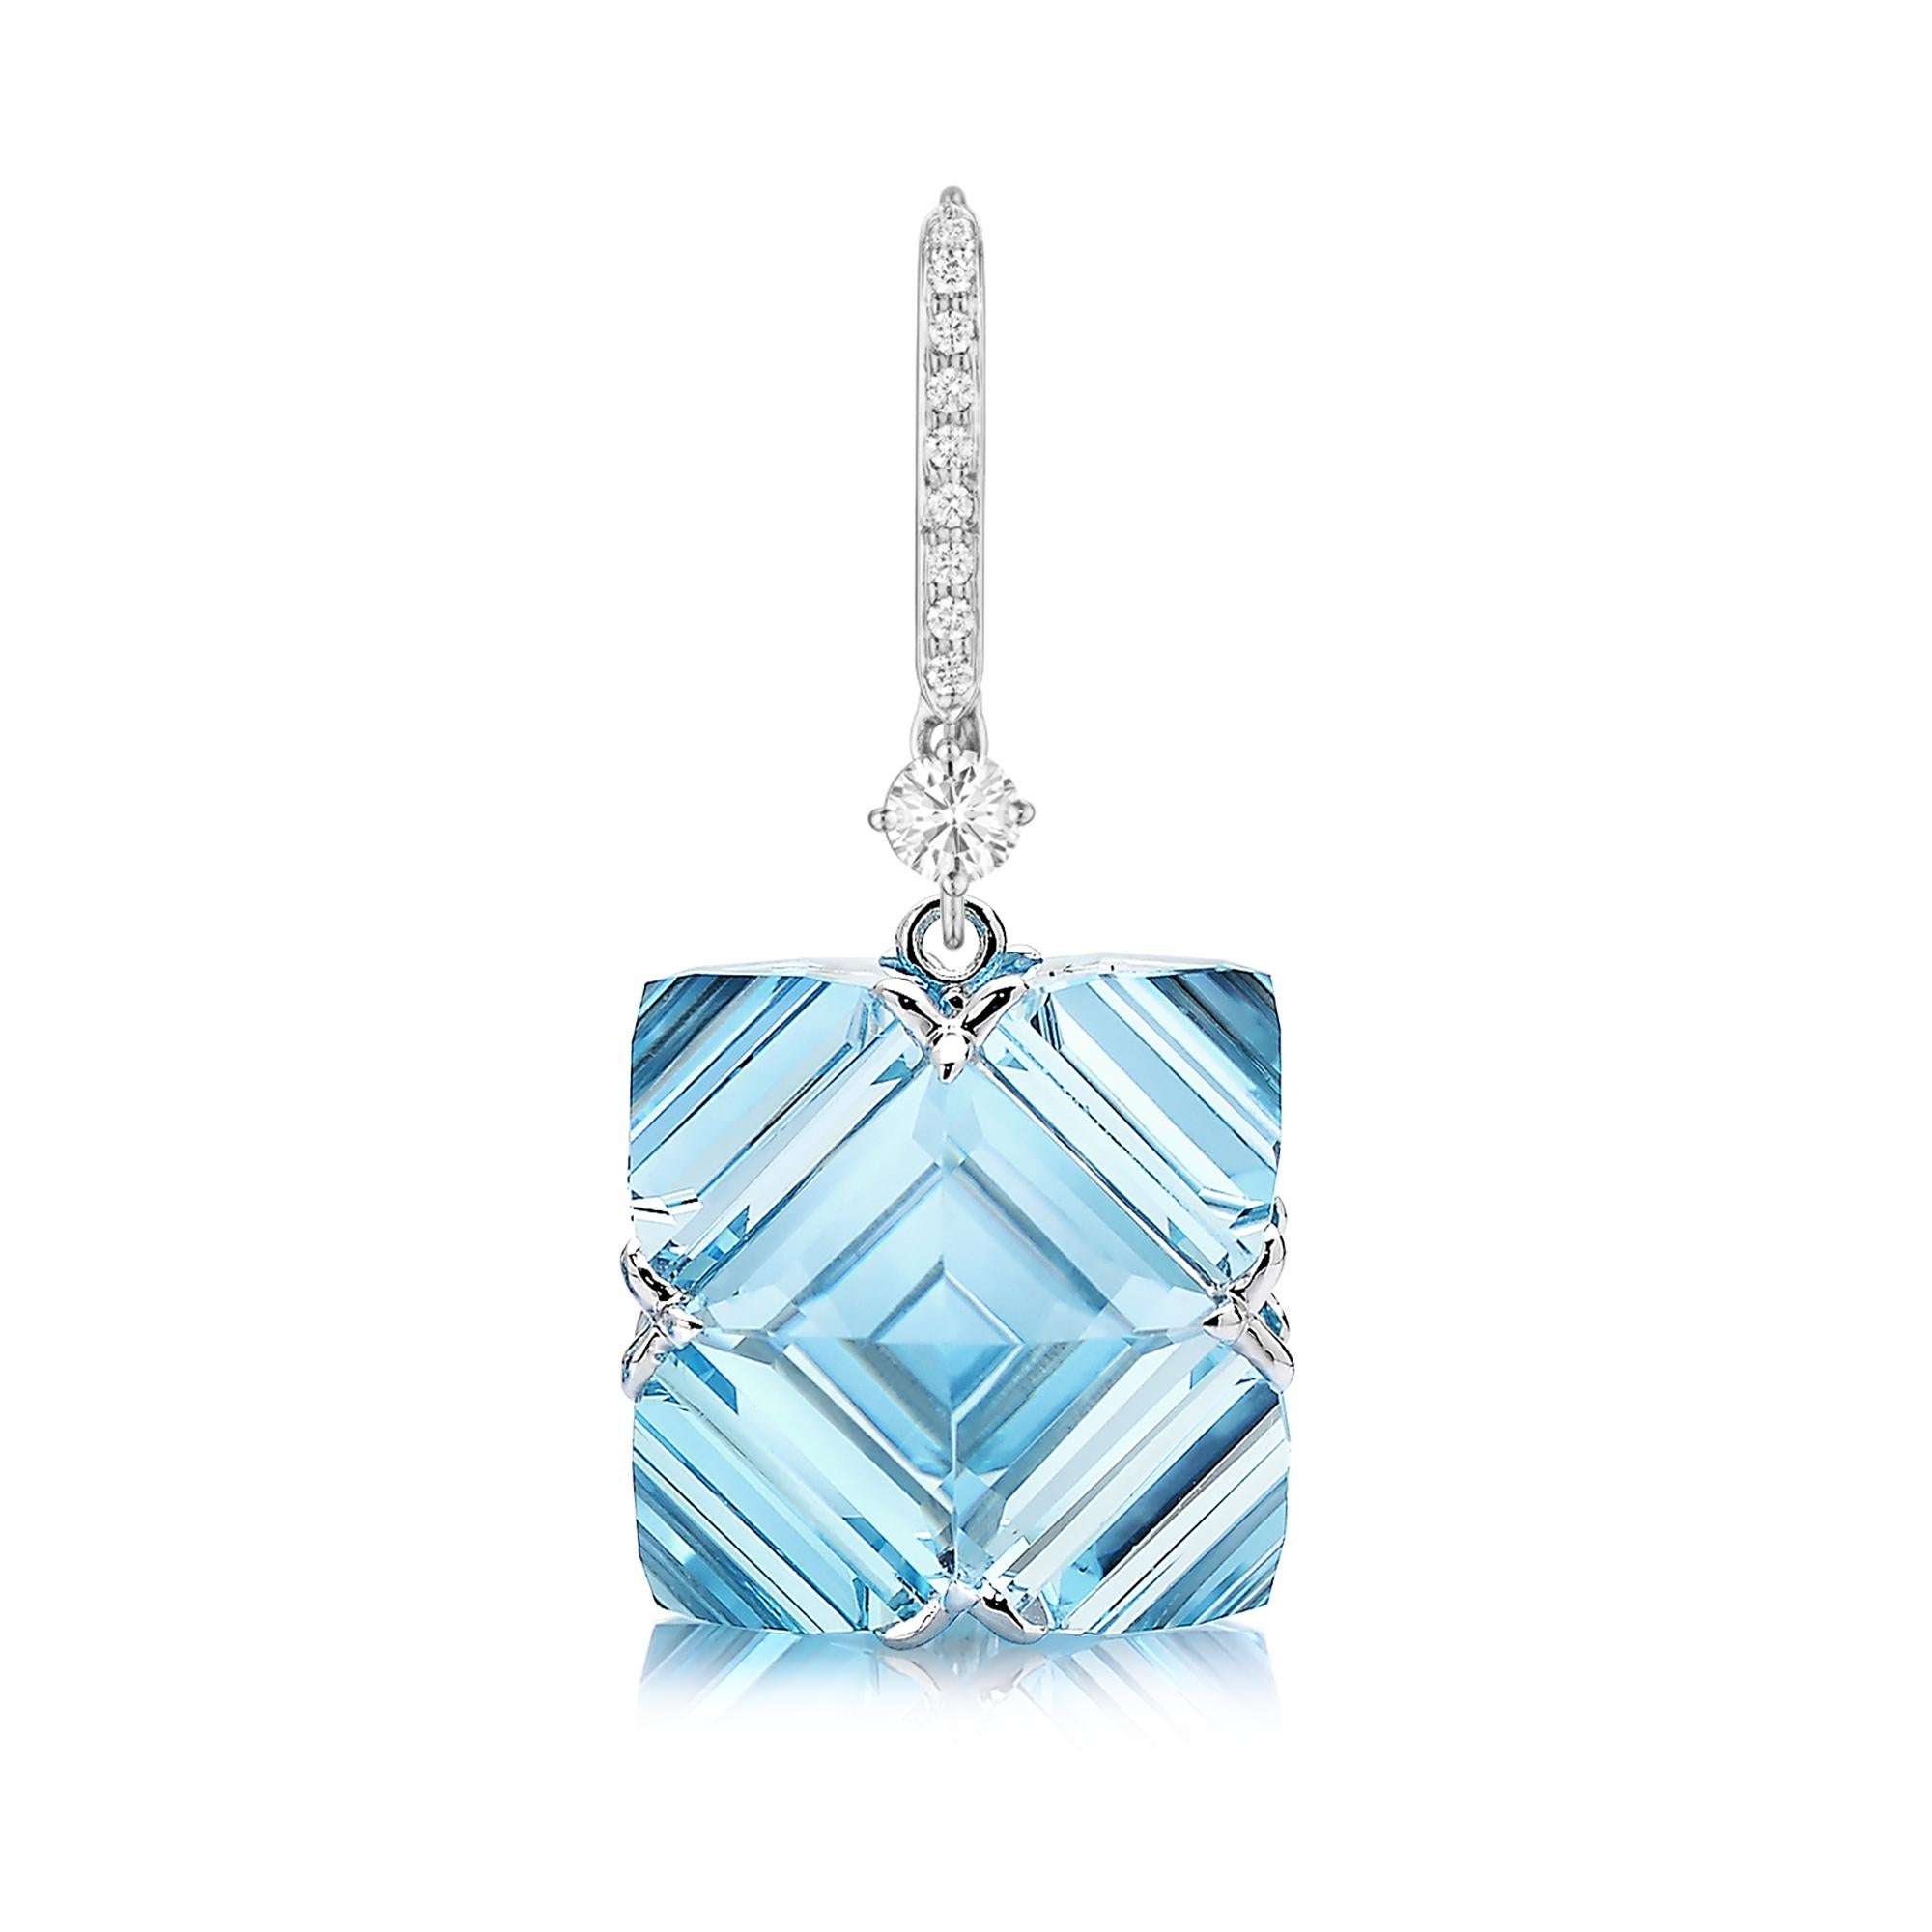 18kt white gold Very PC® earrings with reverse set emerald-cut blue topaz, round white sapphires and pave-set round brilliant diamonds.

Staying true to Paolo Costagli’s appreciation for modern and clean geometries, the Very PC® collection embodies